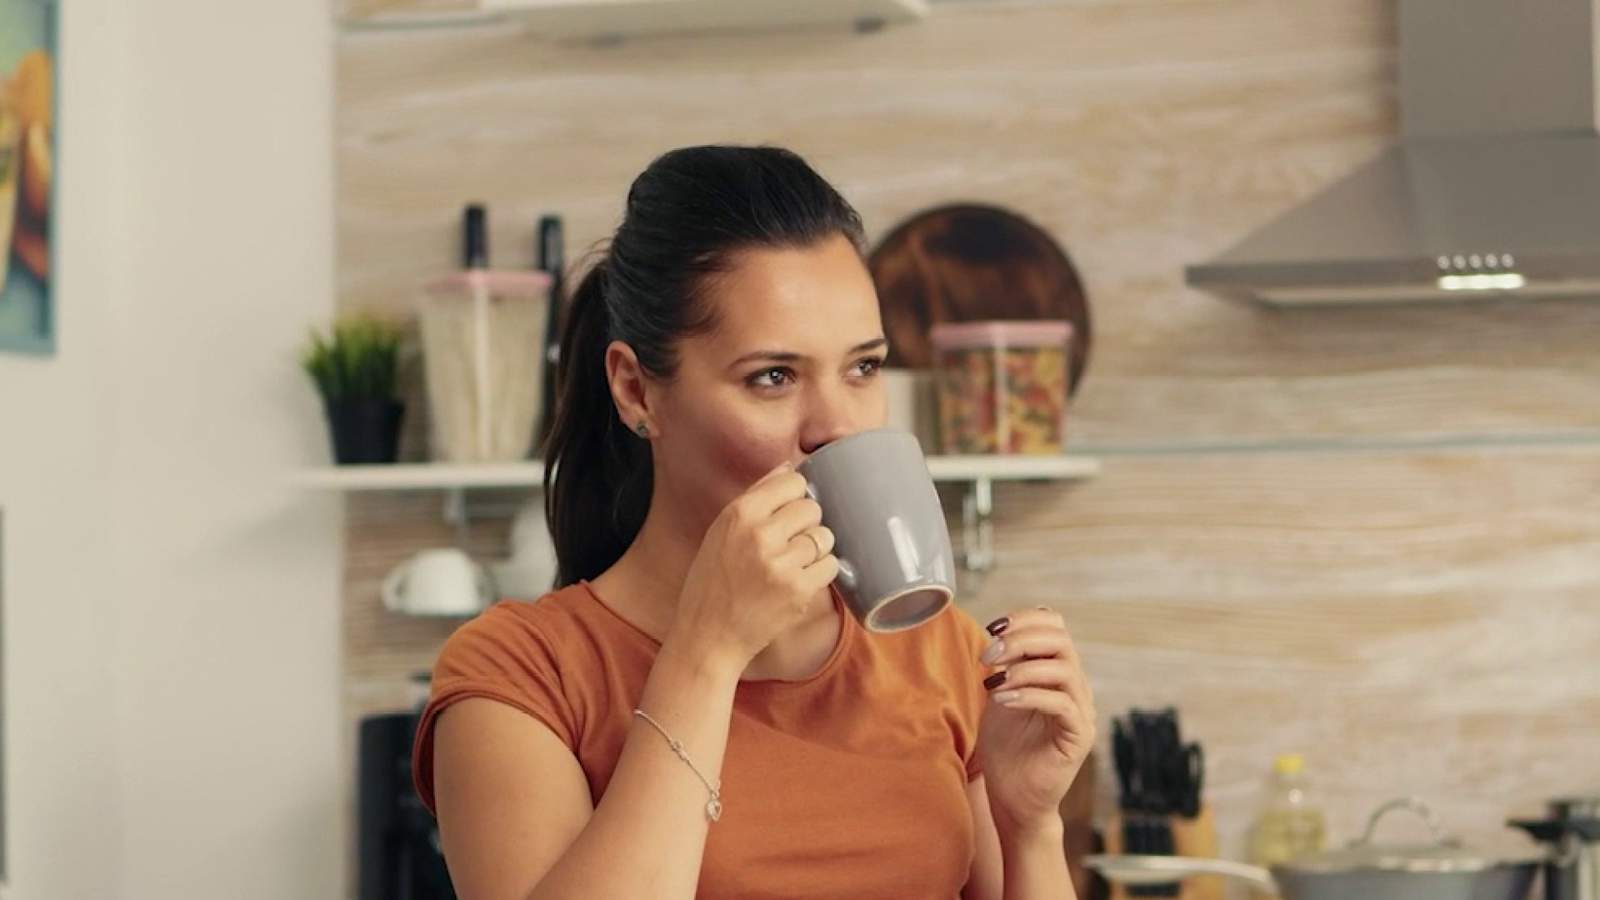 Study suggests drinking coffee as soon as you wake up may be bad for your health